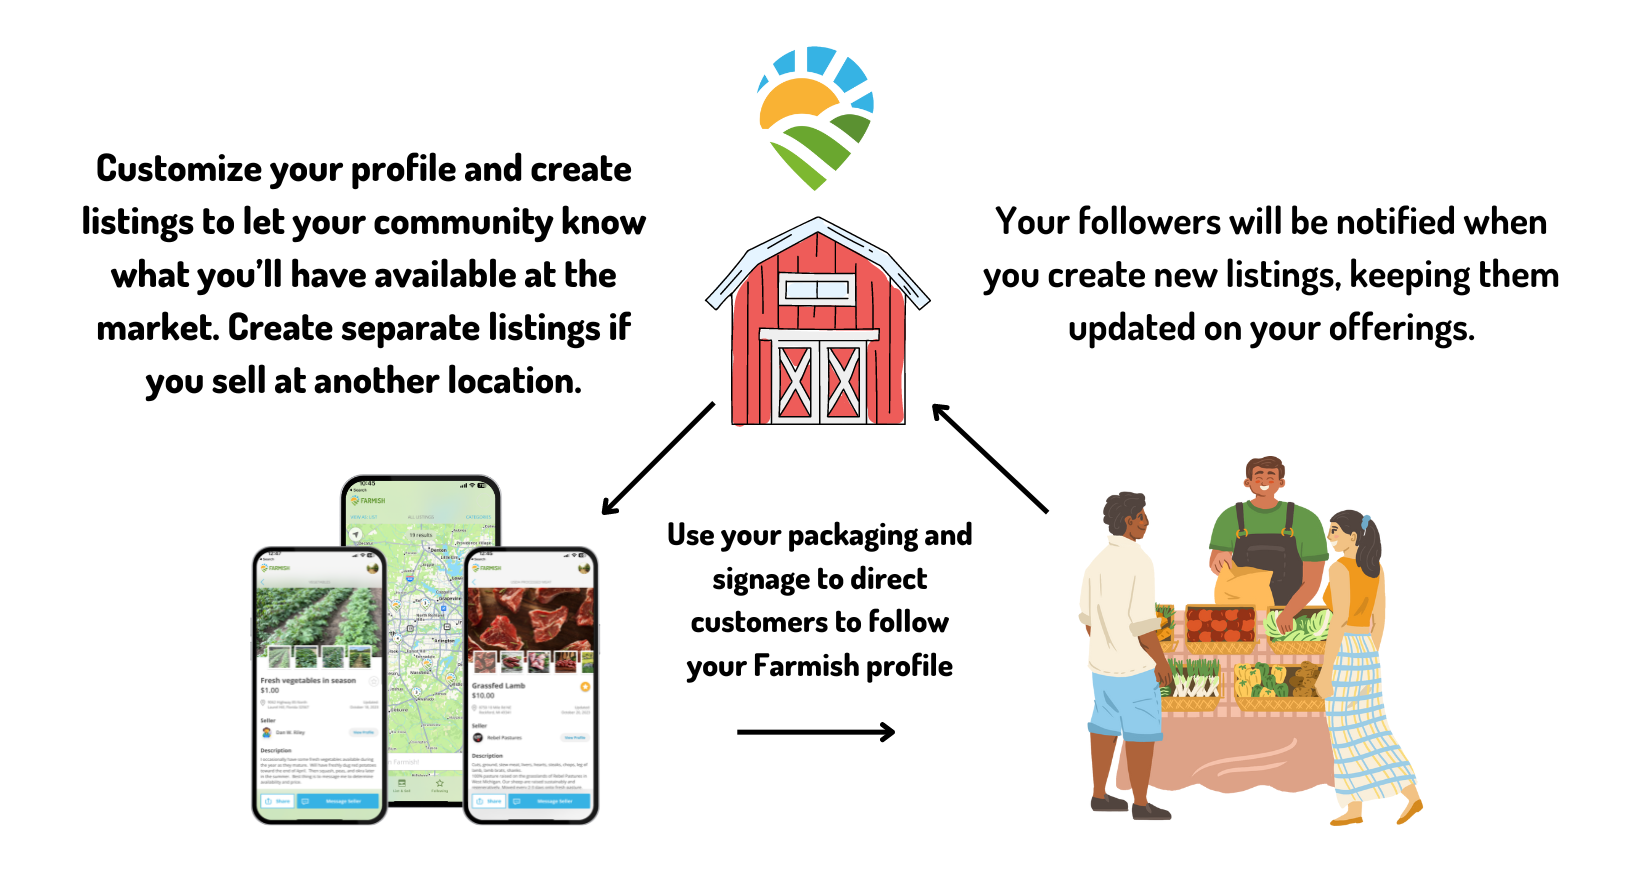 Connect with local customers and make in-person sales using the Farmish app. Use the same profile to connect with wholesale buyers.